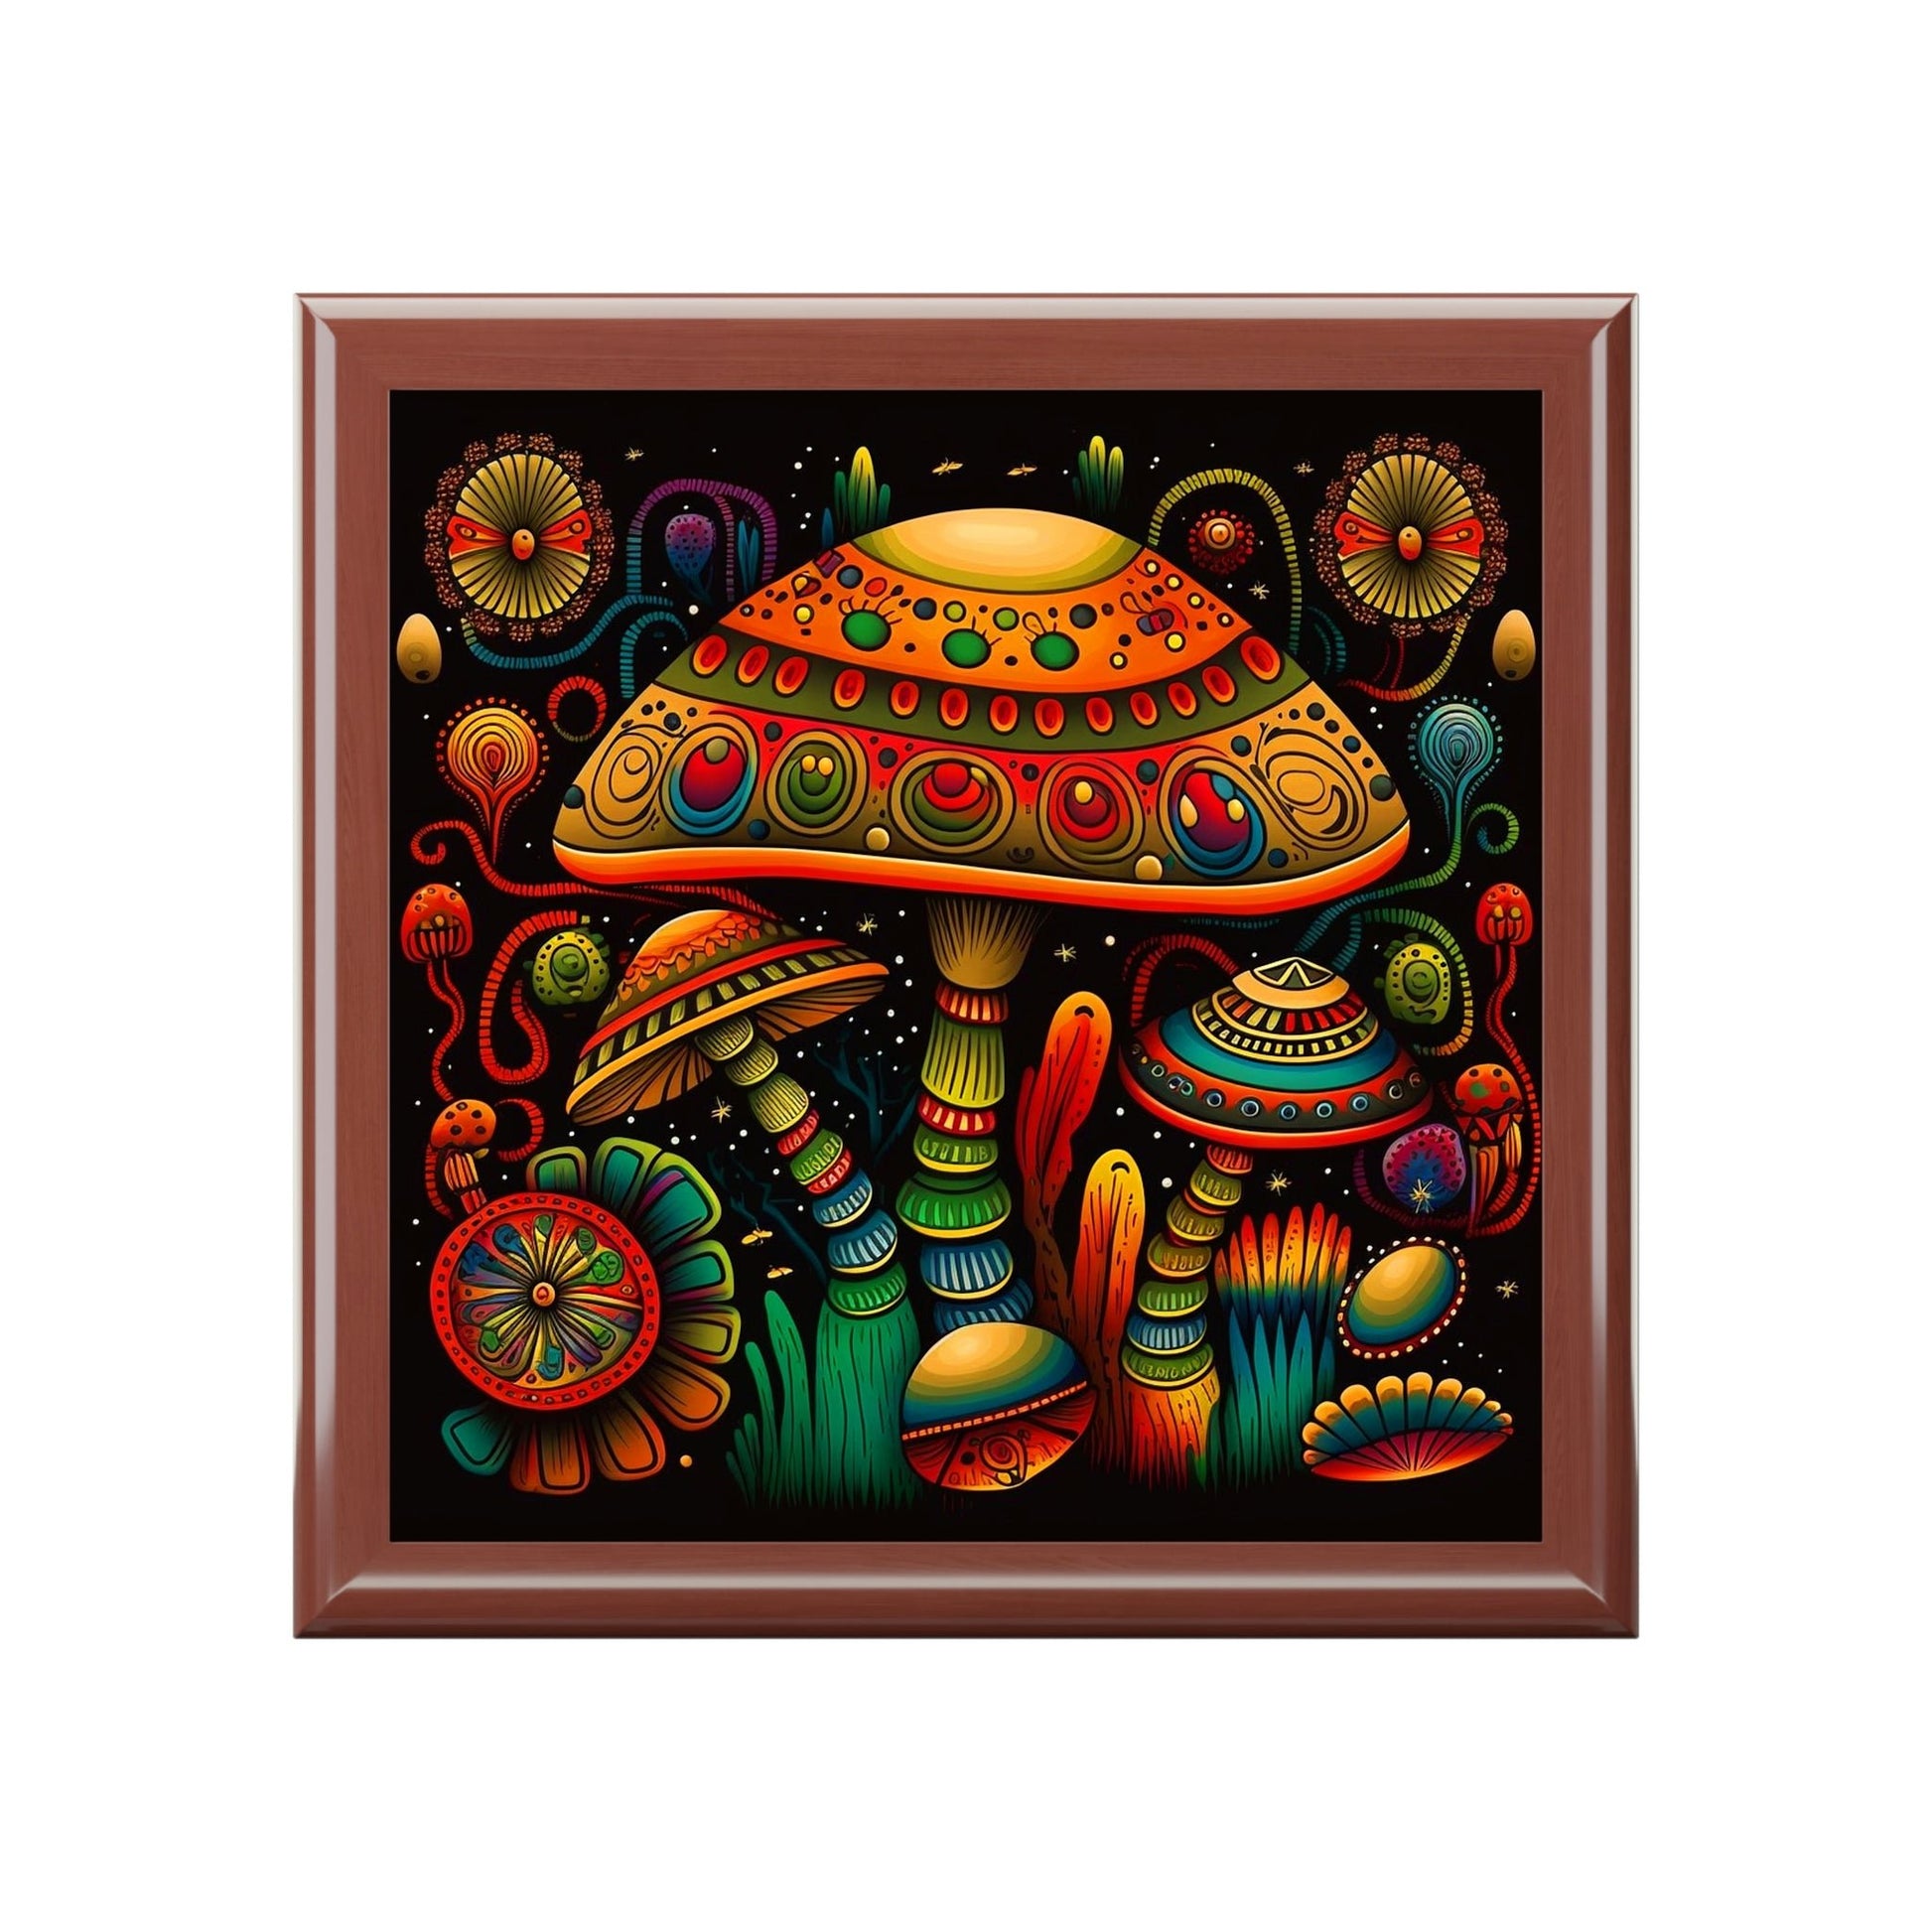 Psychedelic Mushroom Wooden Keepsake Jewelry Box with Ceramic Tile Cover